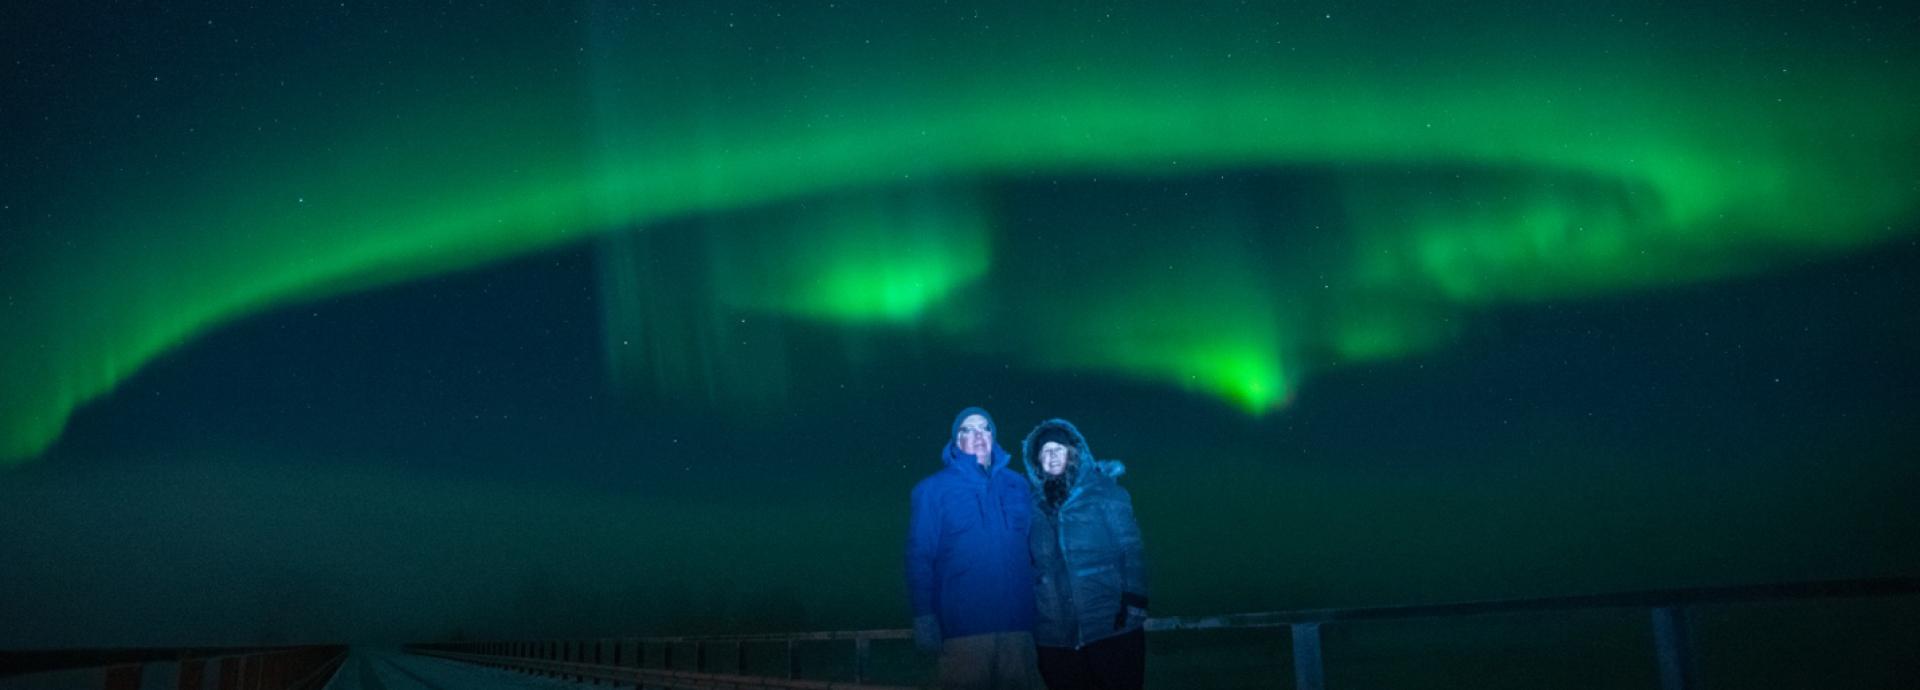 David Dorman and his wife Melanie standing in front of green Northern Lights